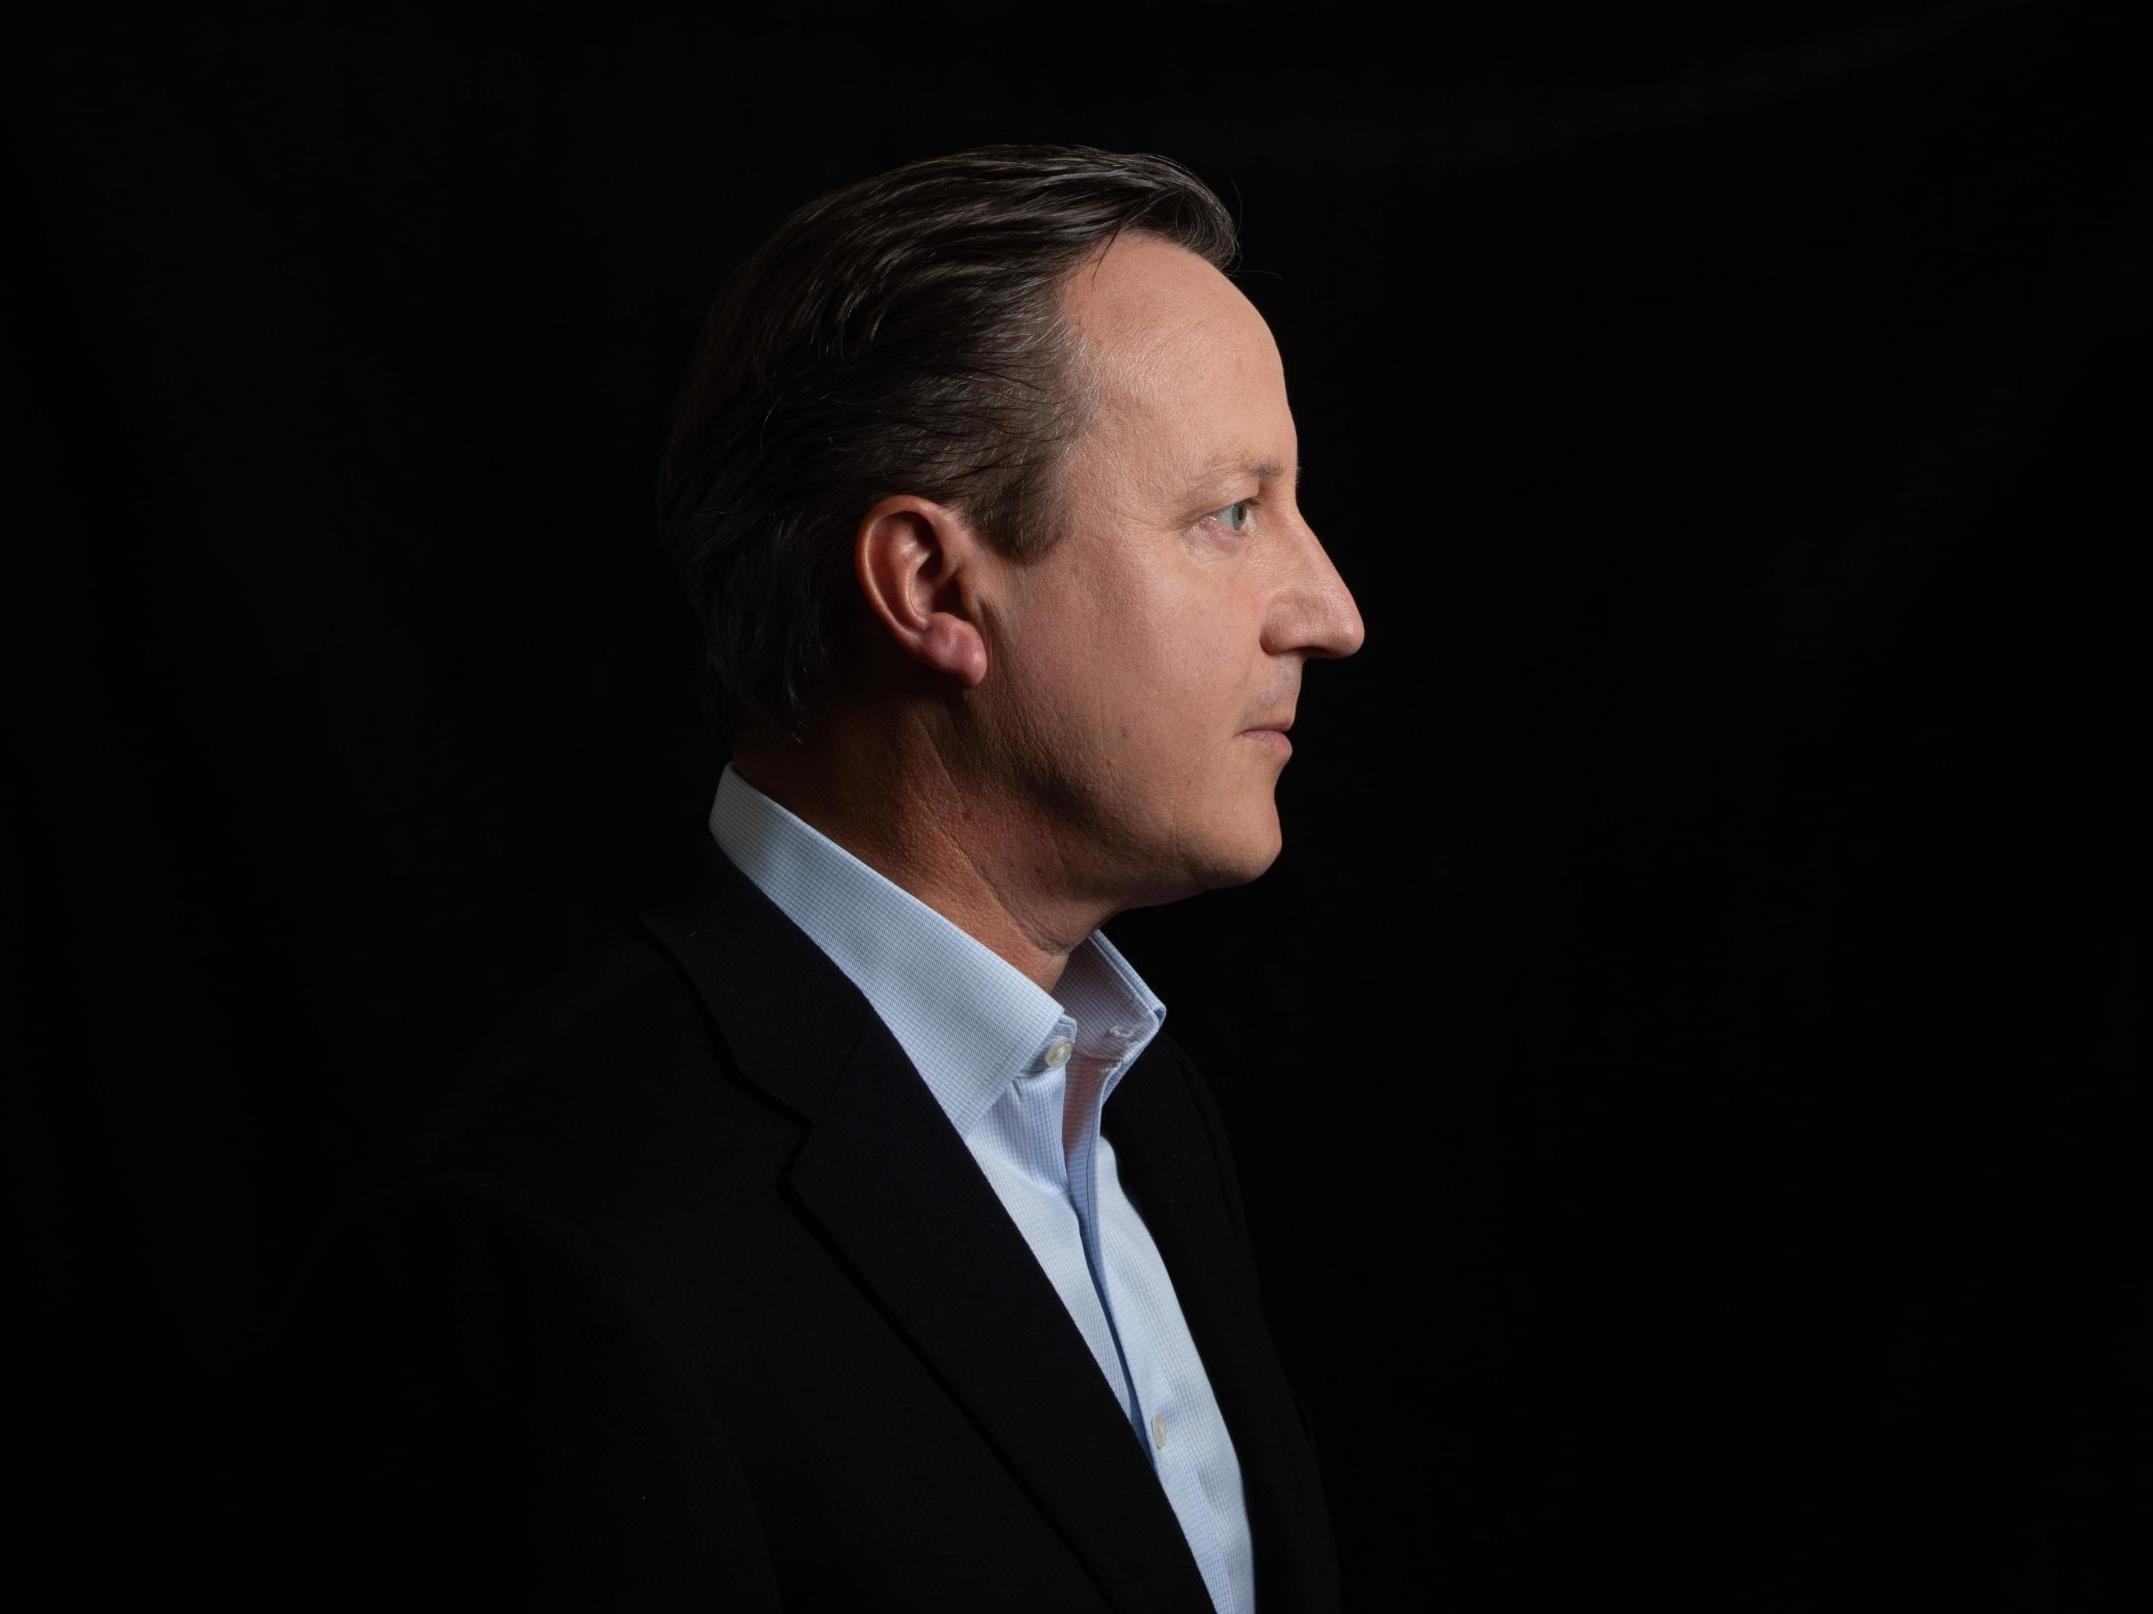 'The Cameron Years' on BBC1 assesses David Cameron's time as prime minister